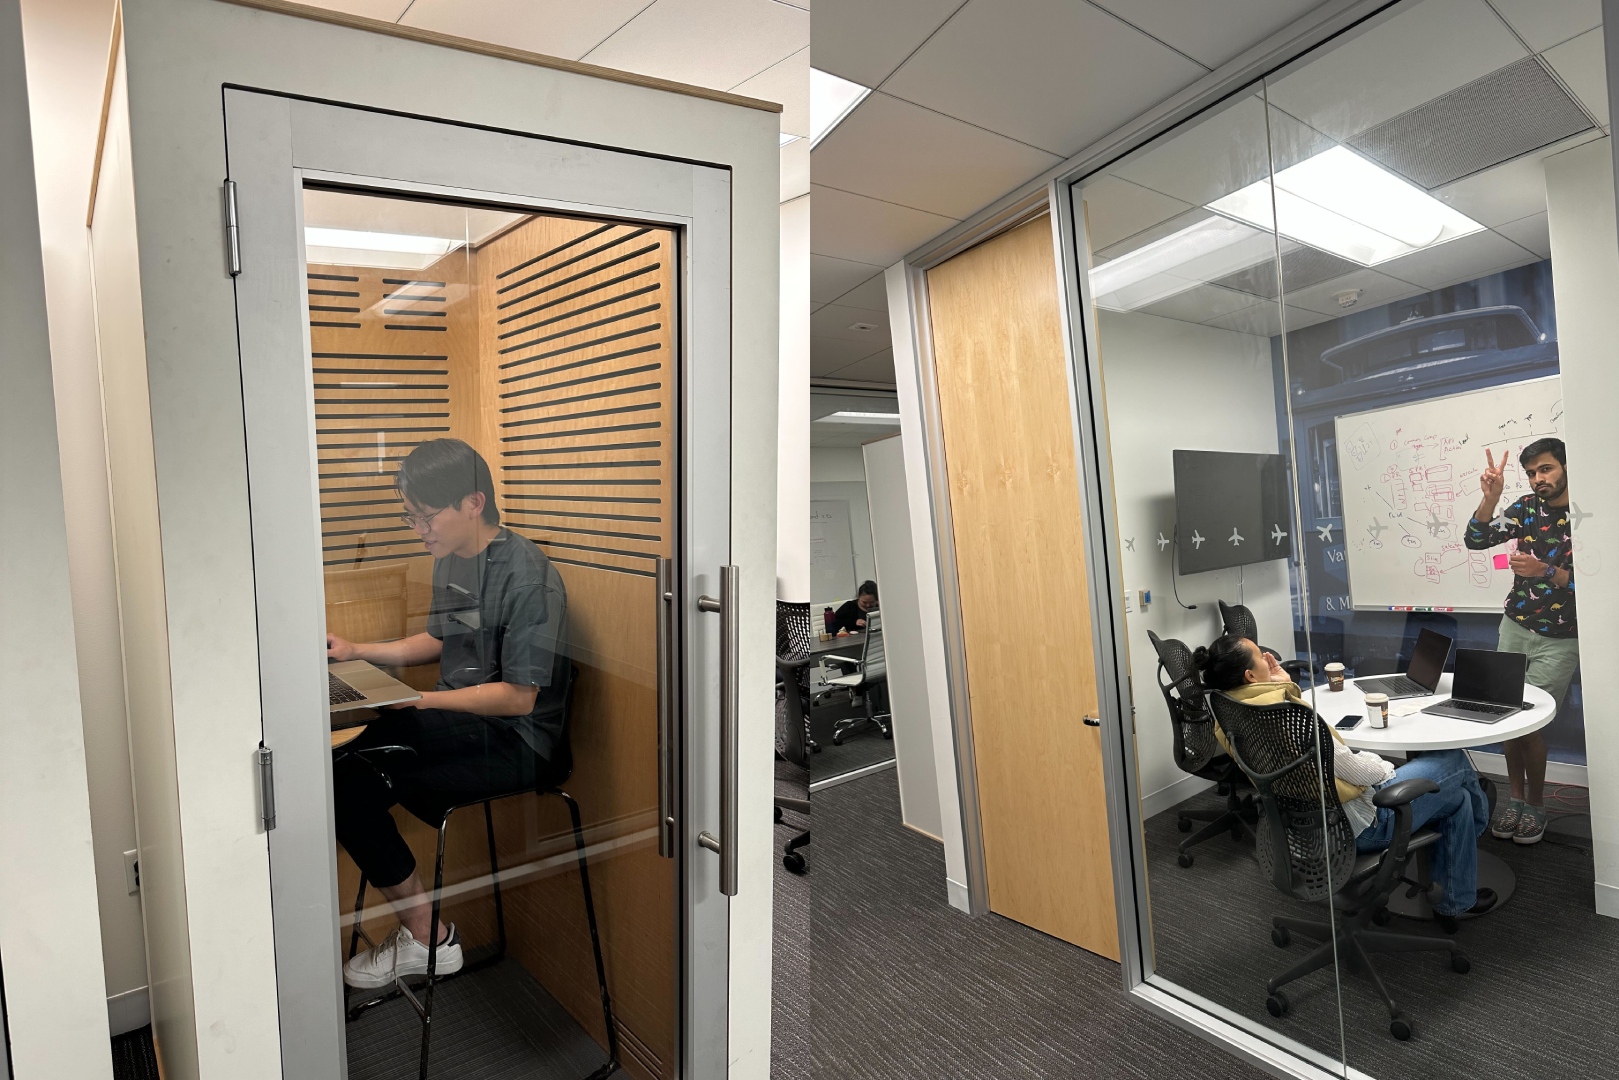 Members of the Unit21 team working in conference rooms at the company's San Francisco office